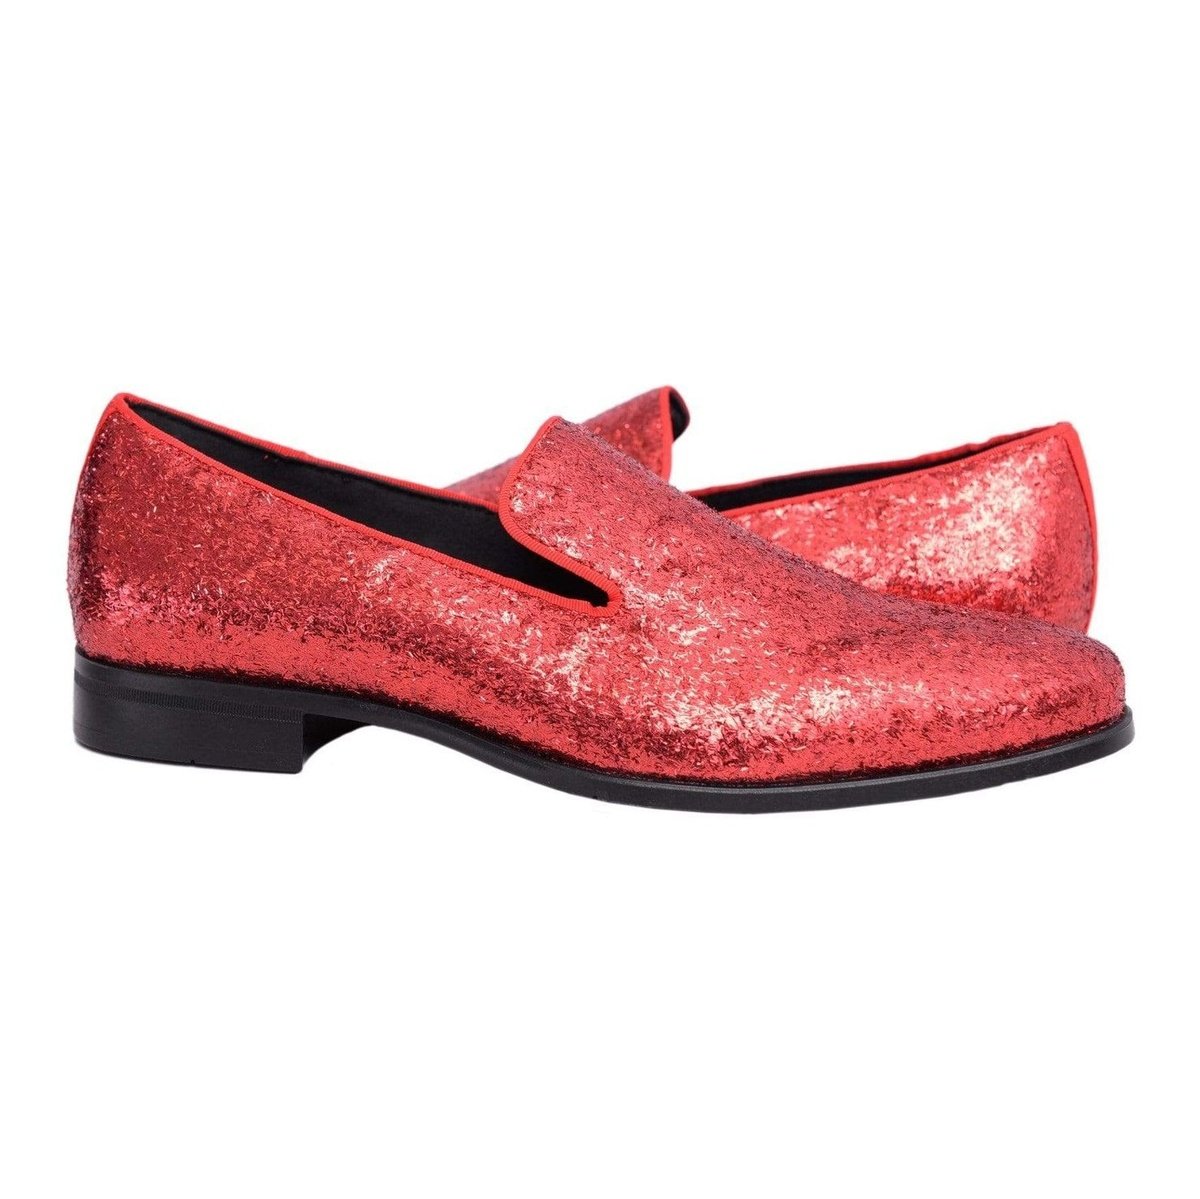 Stacy Adams Swank Textured Red Sparkle Slip-on Dress Shoes - The Suit Depot